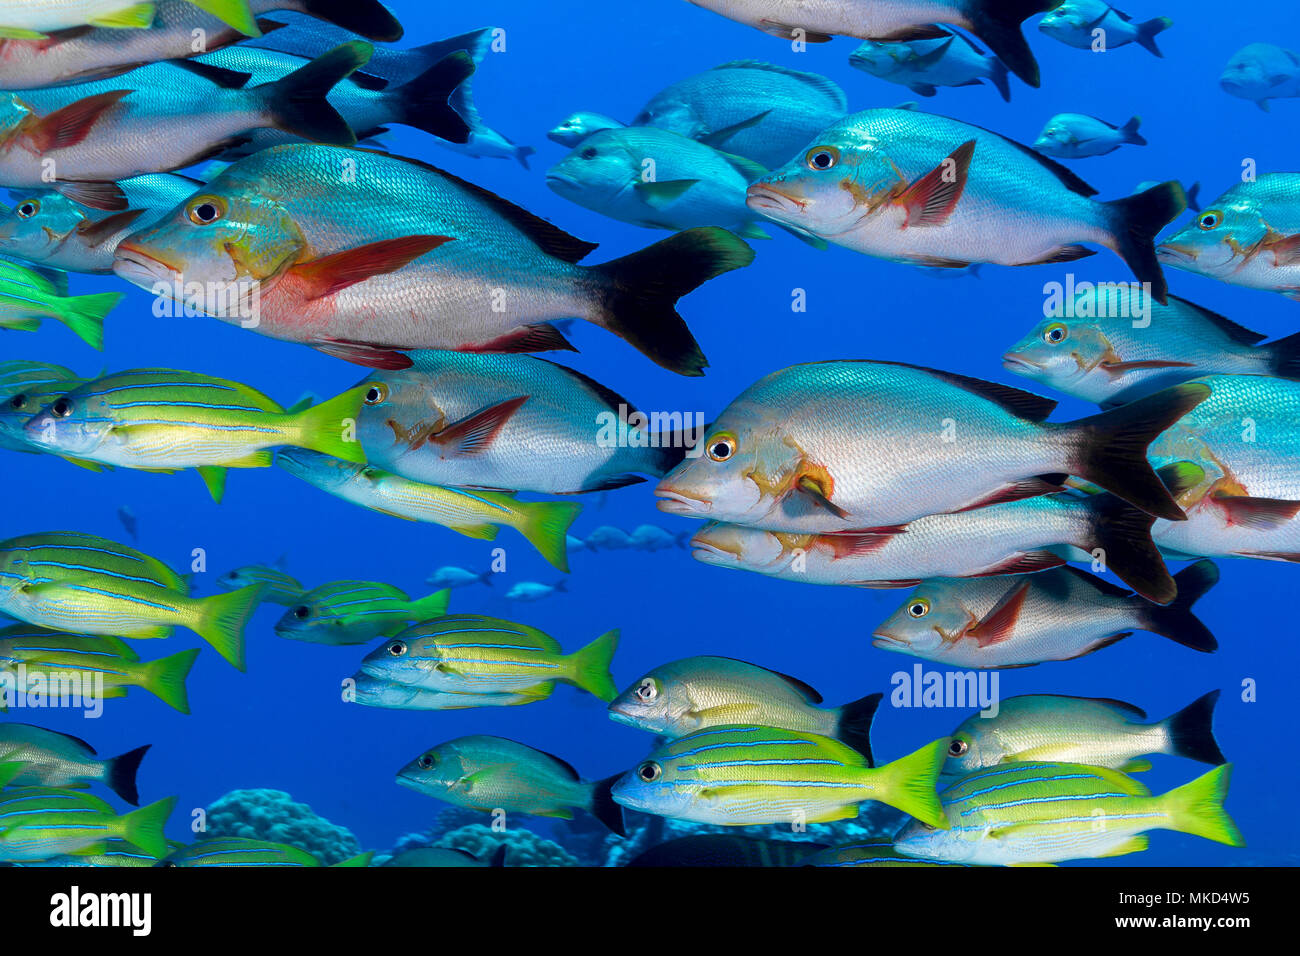 Left side view School of Paddletail Snappers (Lutjanus gibbus) and  Bluelined Snappers (Lutjanus kasmira), Tahiti, French Polynesia Stock Photo  - Alamy